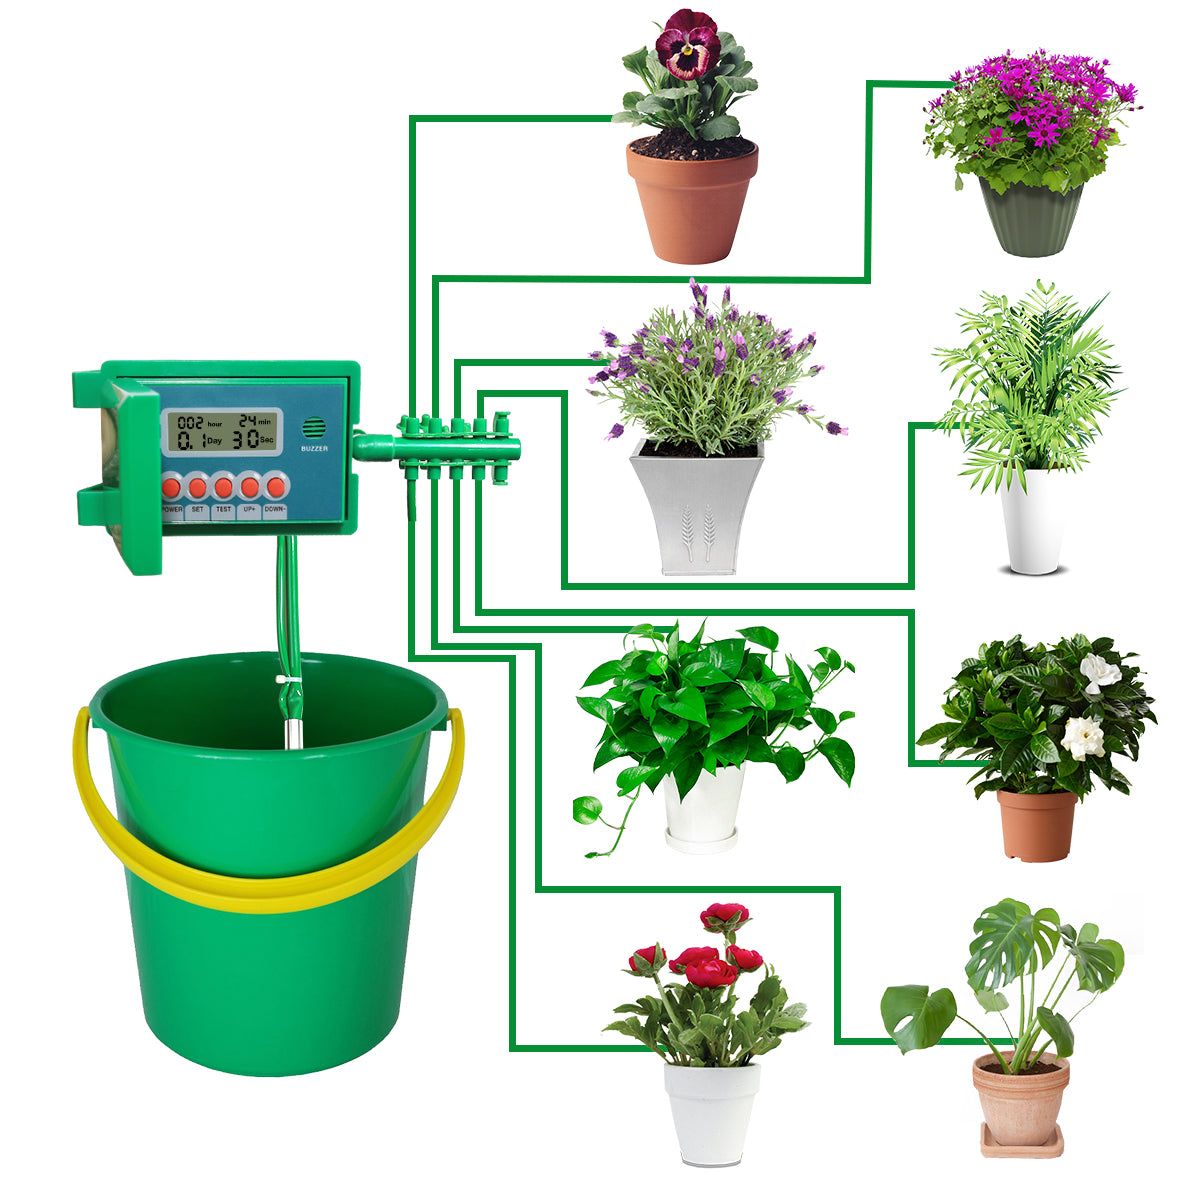 Automatic Micro Home Drip Irrigation Watering Kits System Sprinkler with Smart Controller for Garden - Minihomy